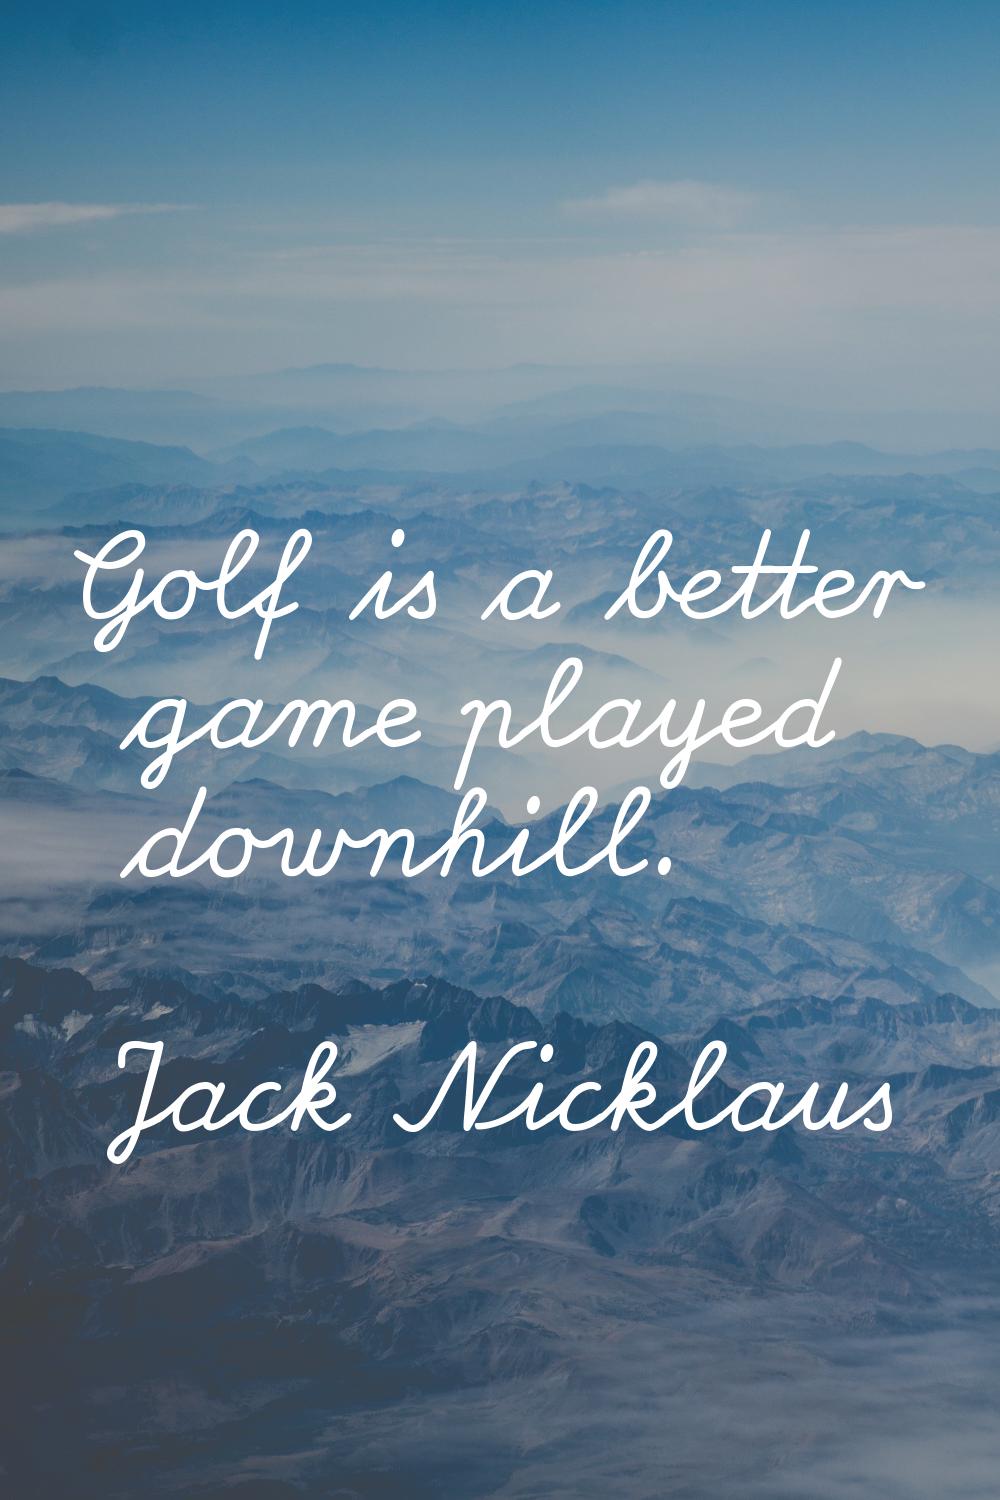 Golf is a better game played downhill.